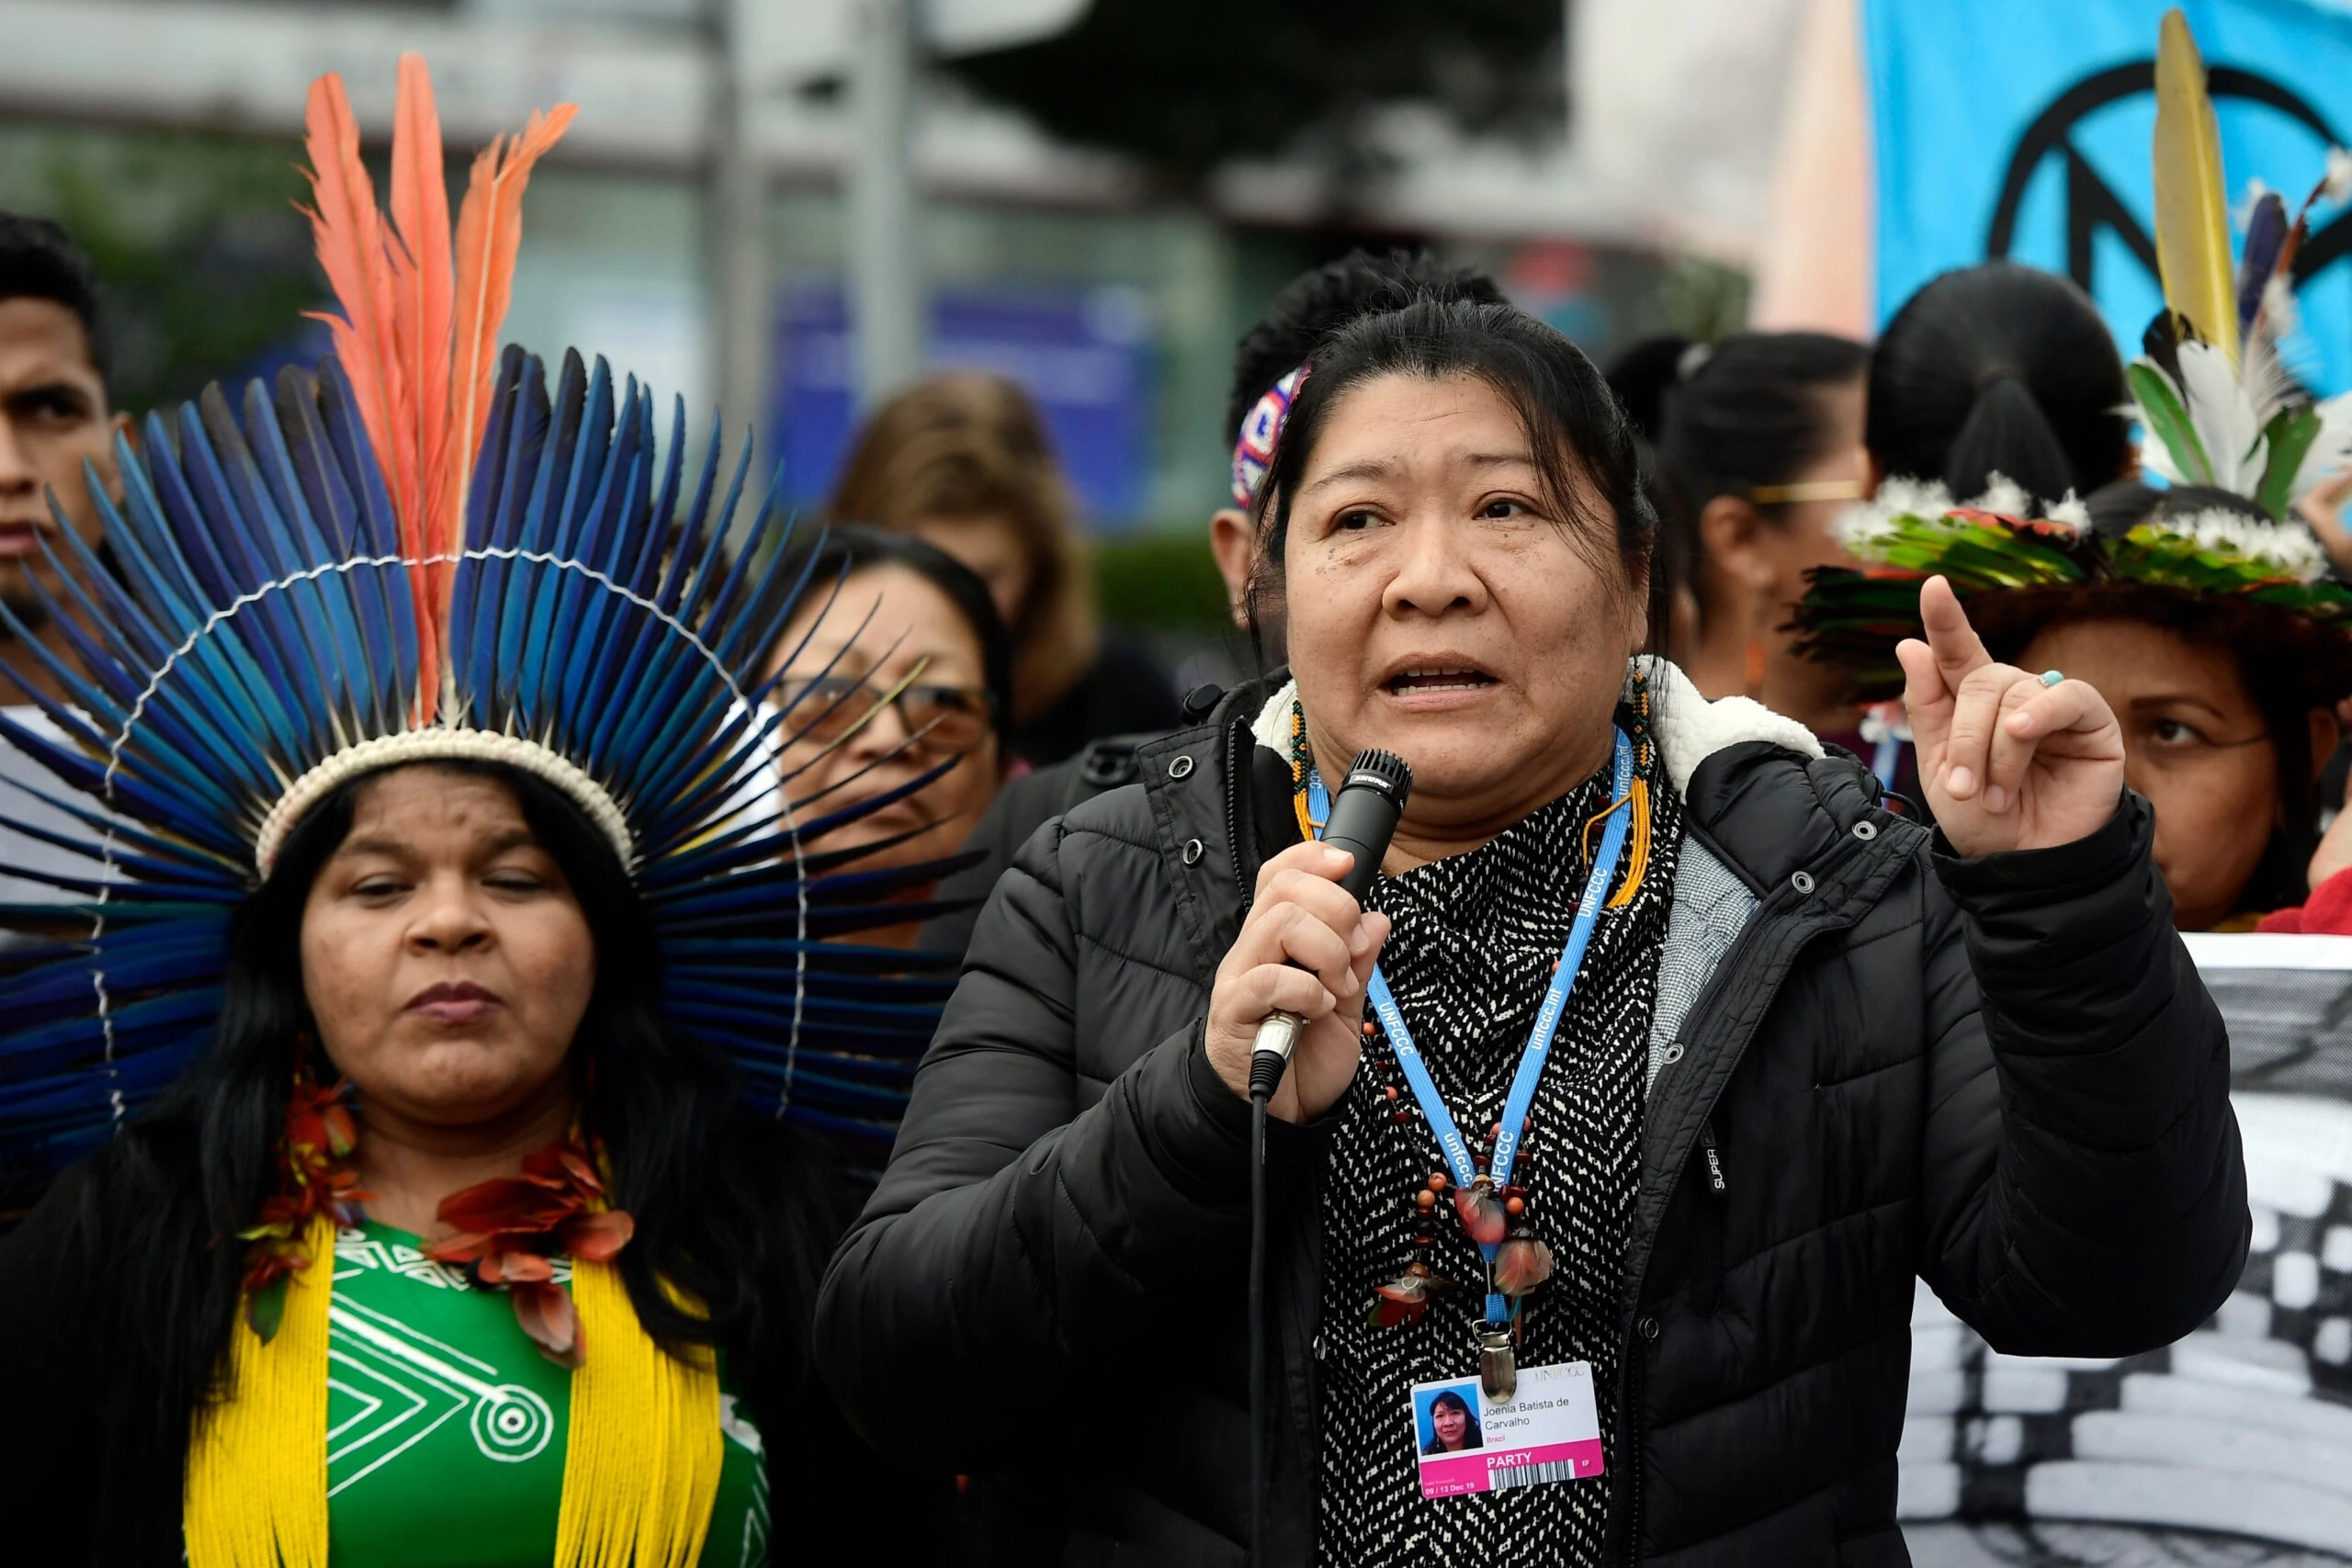 Indigenous rights defender, Brazilian lawyer Joenia Batista de Carvalho aka Joenia Wapichana (R) takes part in a demonstration demanding climate justice outside the venue of the UN Climate Change Conference COP25 at the 'IFEMA - Feria de Madrid' exhibition centre, in Madrid, on December 9, 2019. - The COP25 summit opened on December 2 with a stark warning from the UN about the "utterly inadequate" efforts of the world's major economies to curb carbon pollution, in Madrid, after the event's original host Chile withdrew last month due to deadly riots over economic inequality. (Photo by CRISTINA QUICLER / AFP) (Photo by CRISTINA QUICLER/AFP via Getty Images)